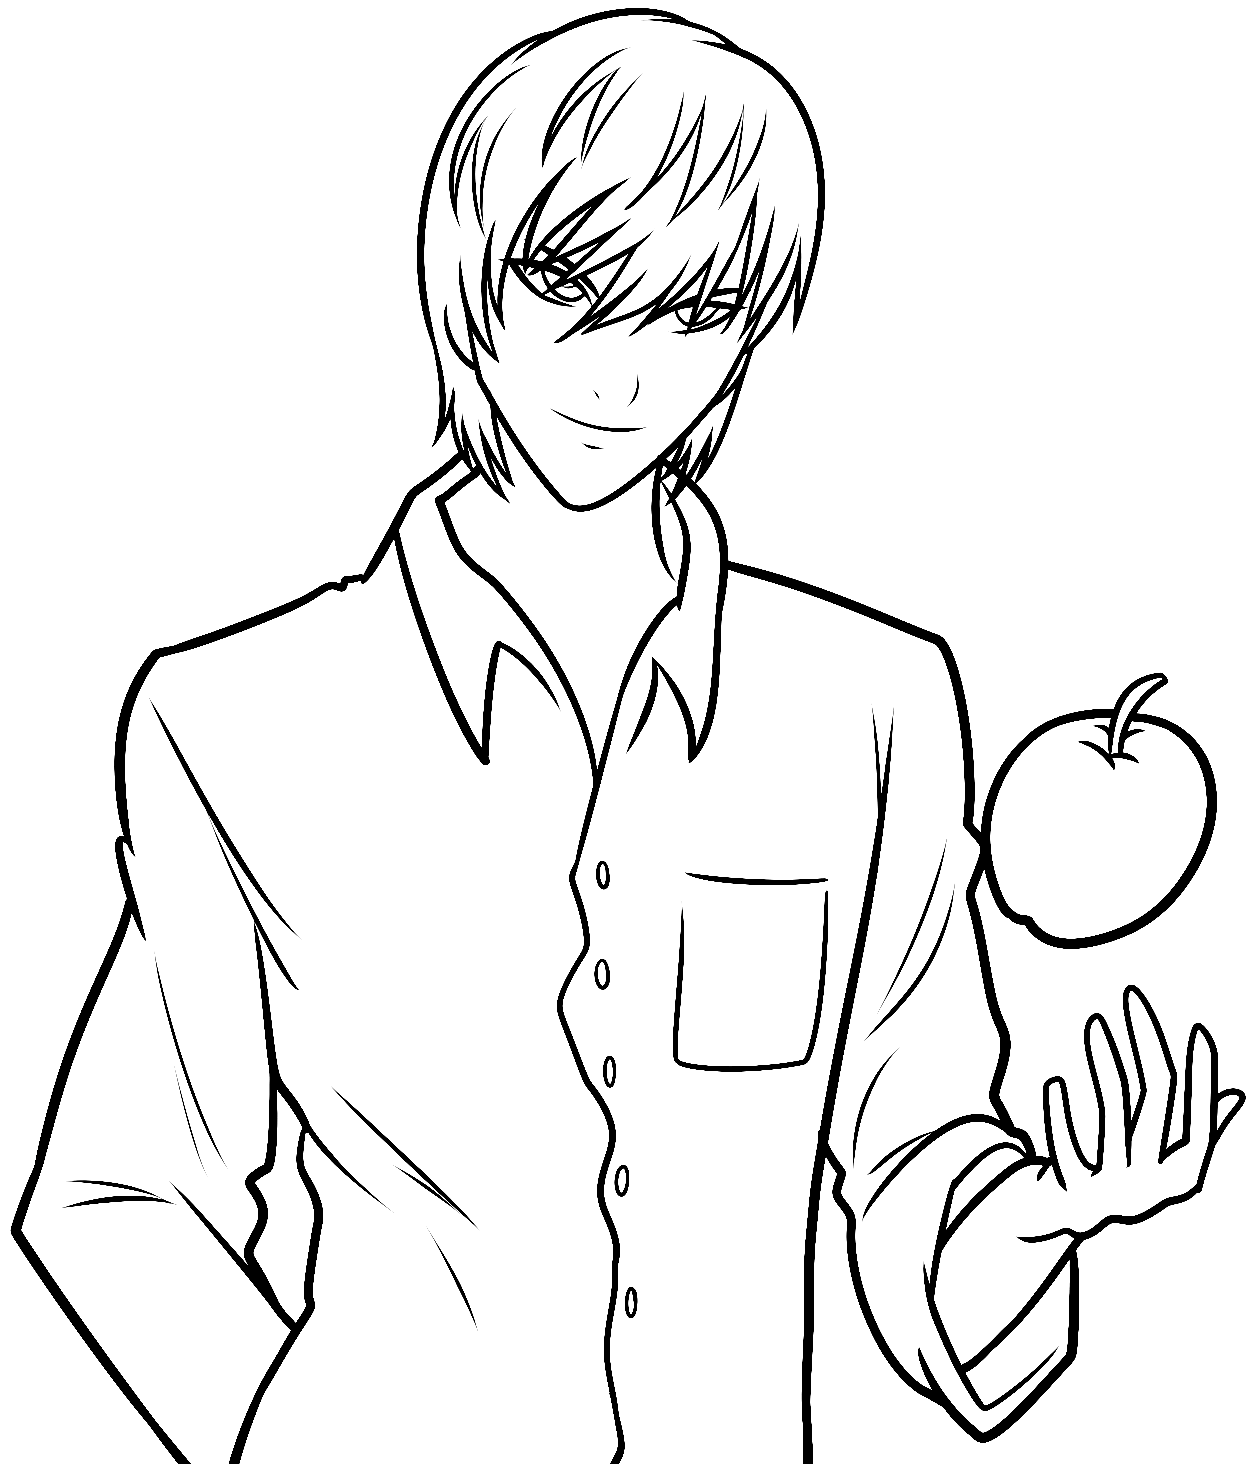 Yagami with Apple Coloring Pages